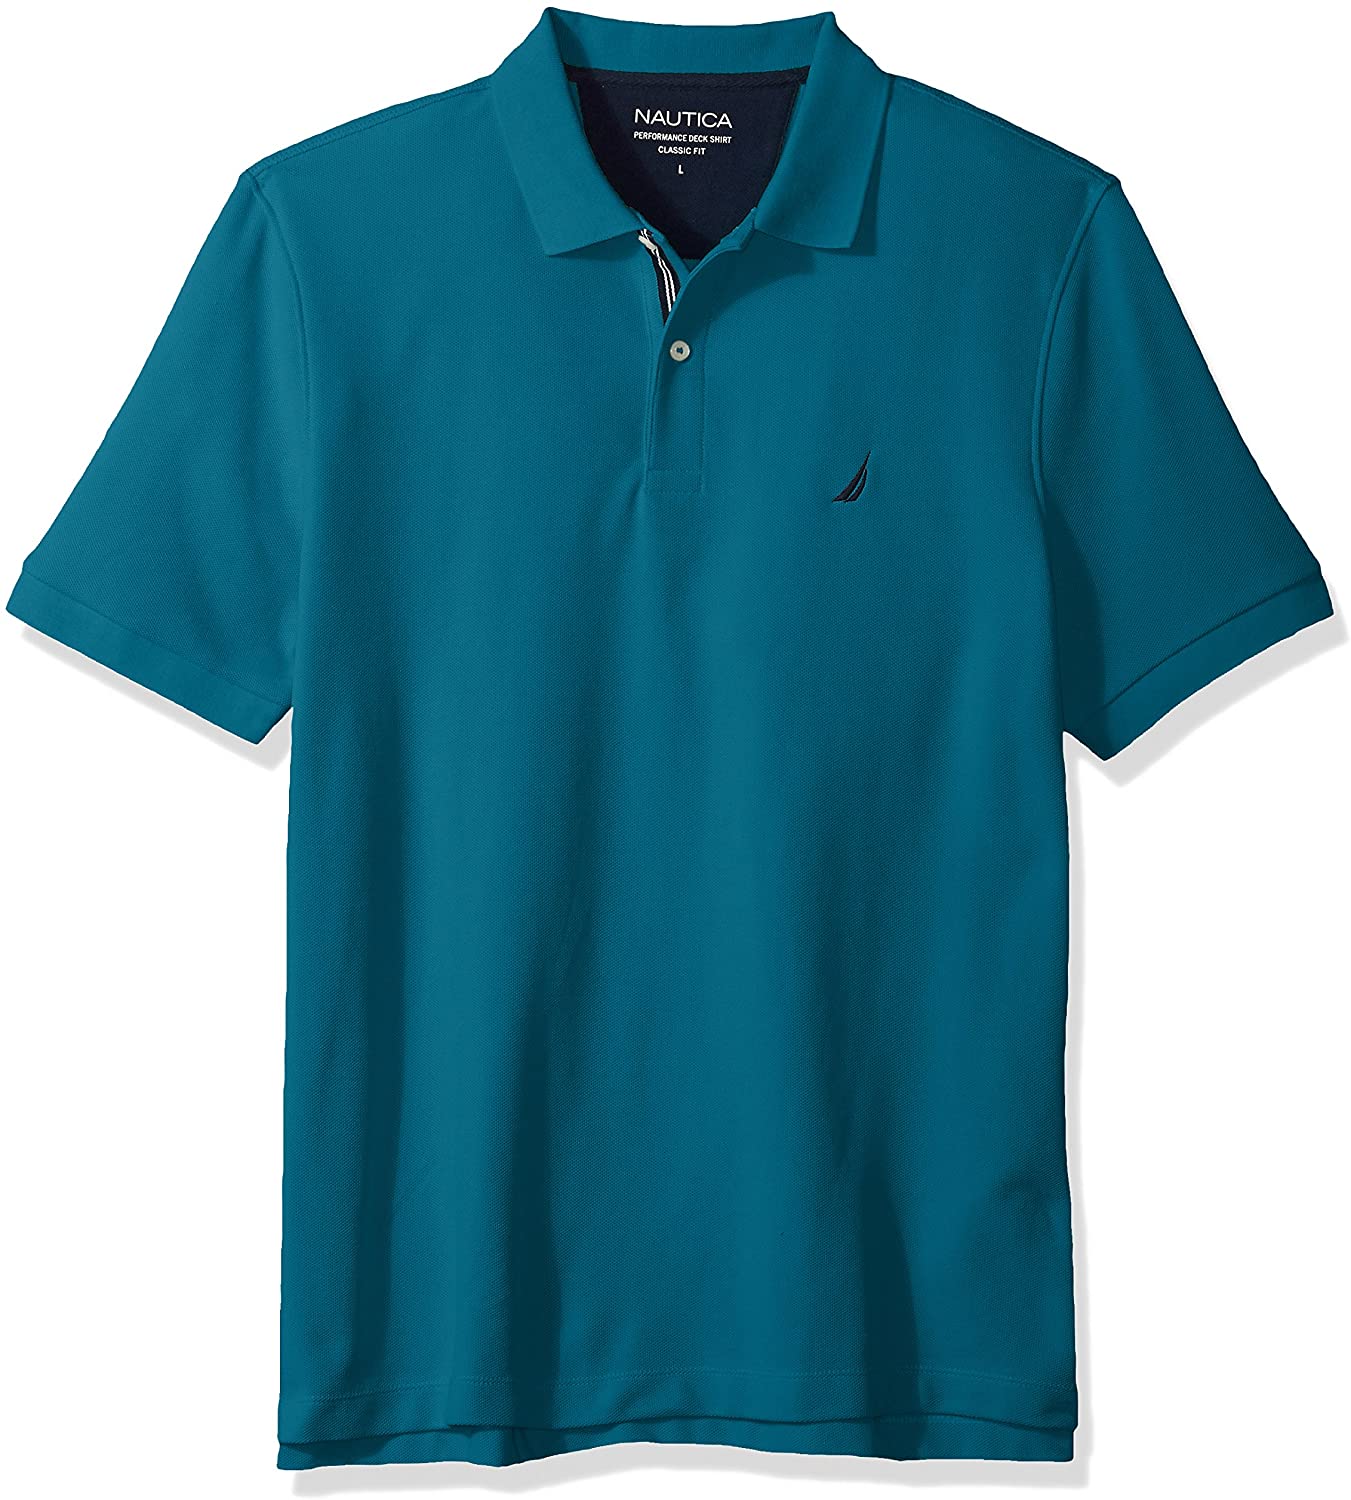 Nautica Men's Classic Short Sleeve Solid Performance Deck Polo